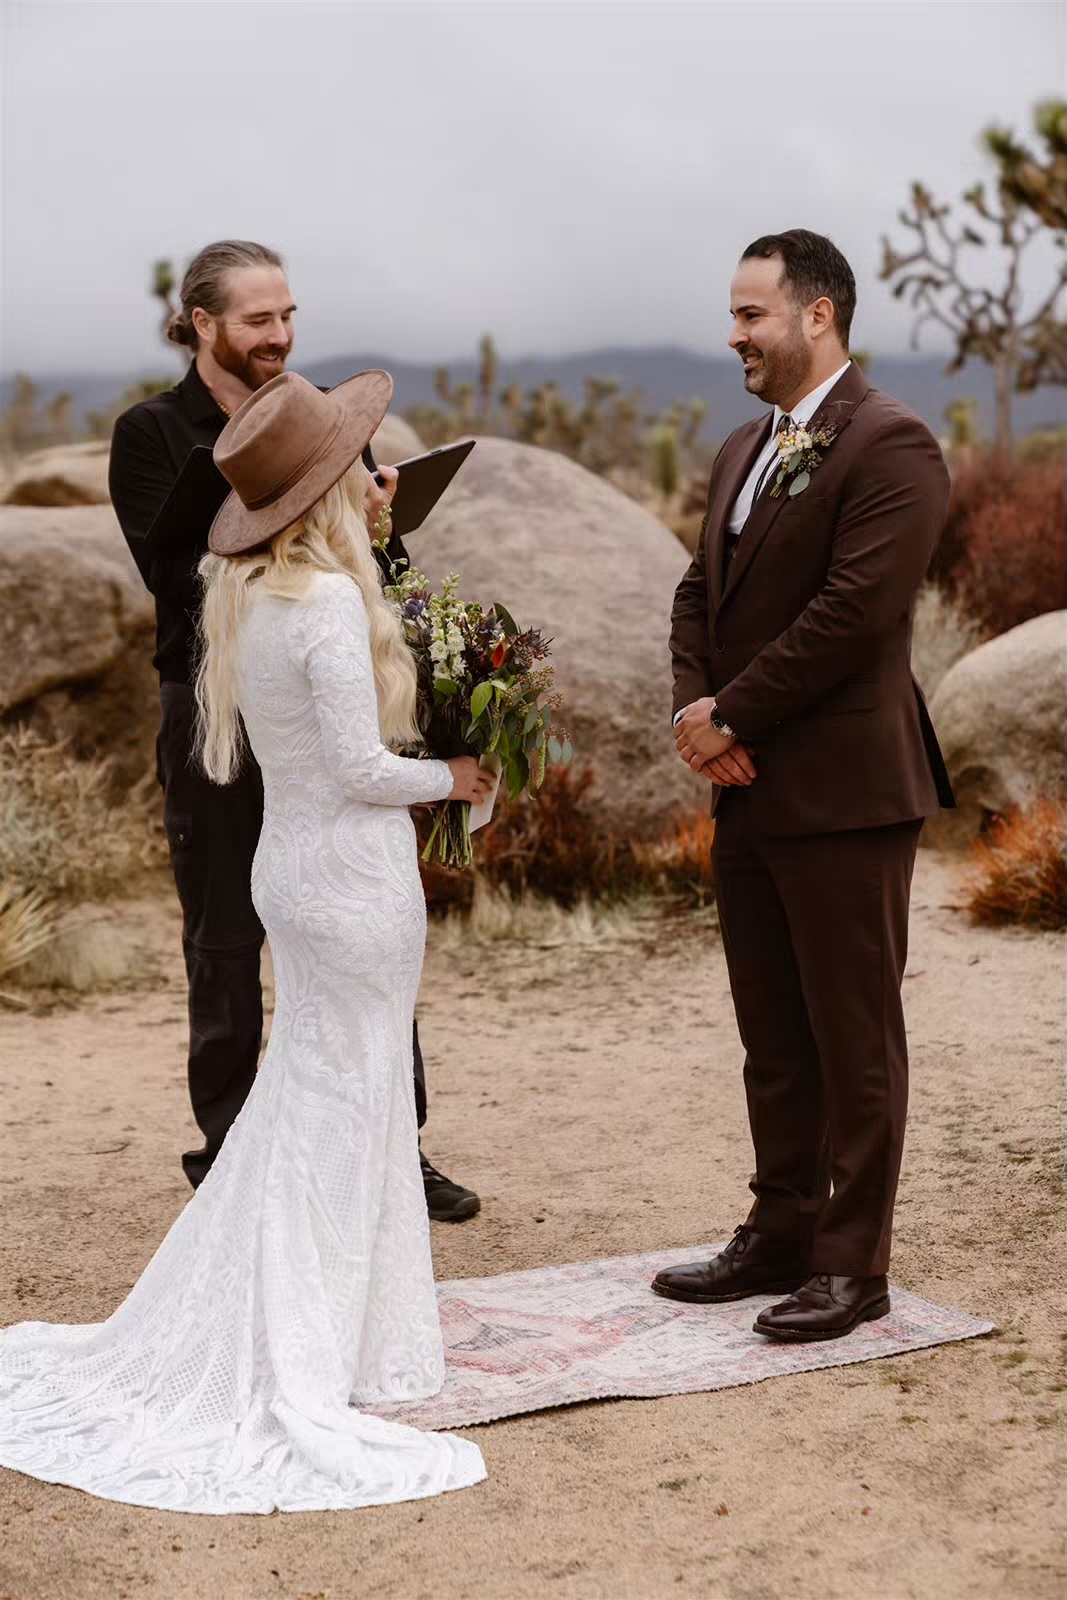 Couple says vows at Joshua Tree elopement ceremony